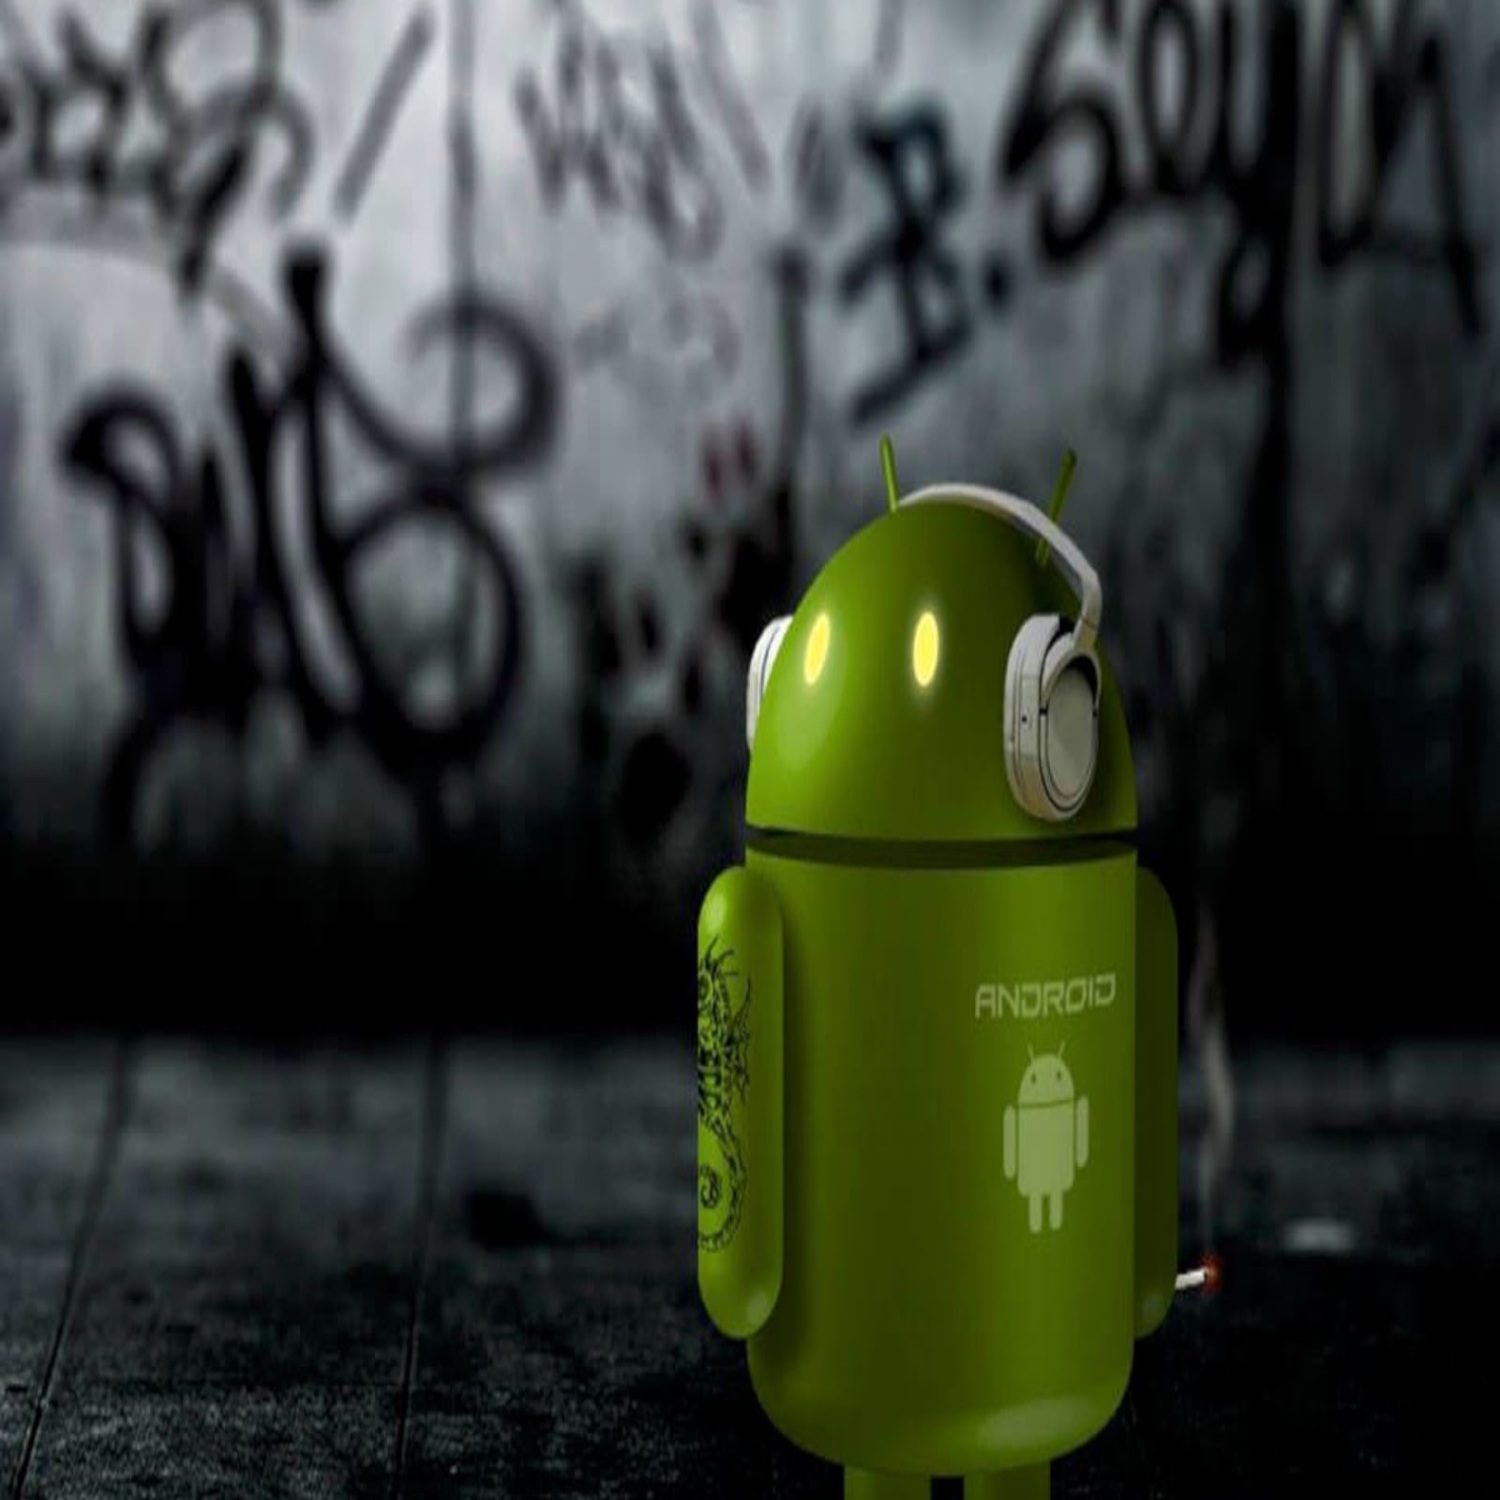 Image of a green android character with headphones.